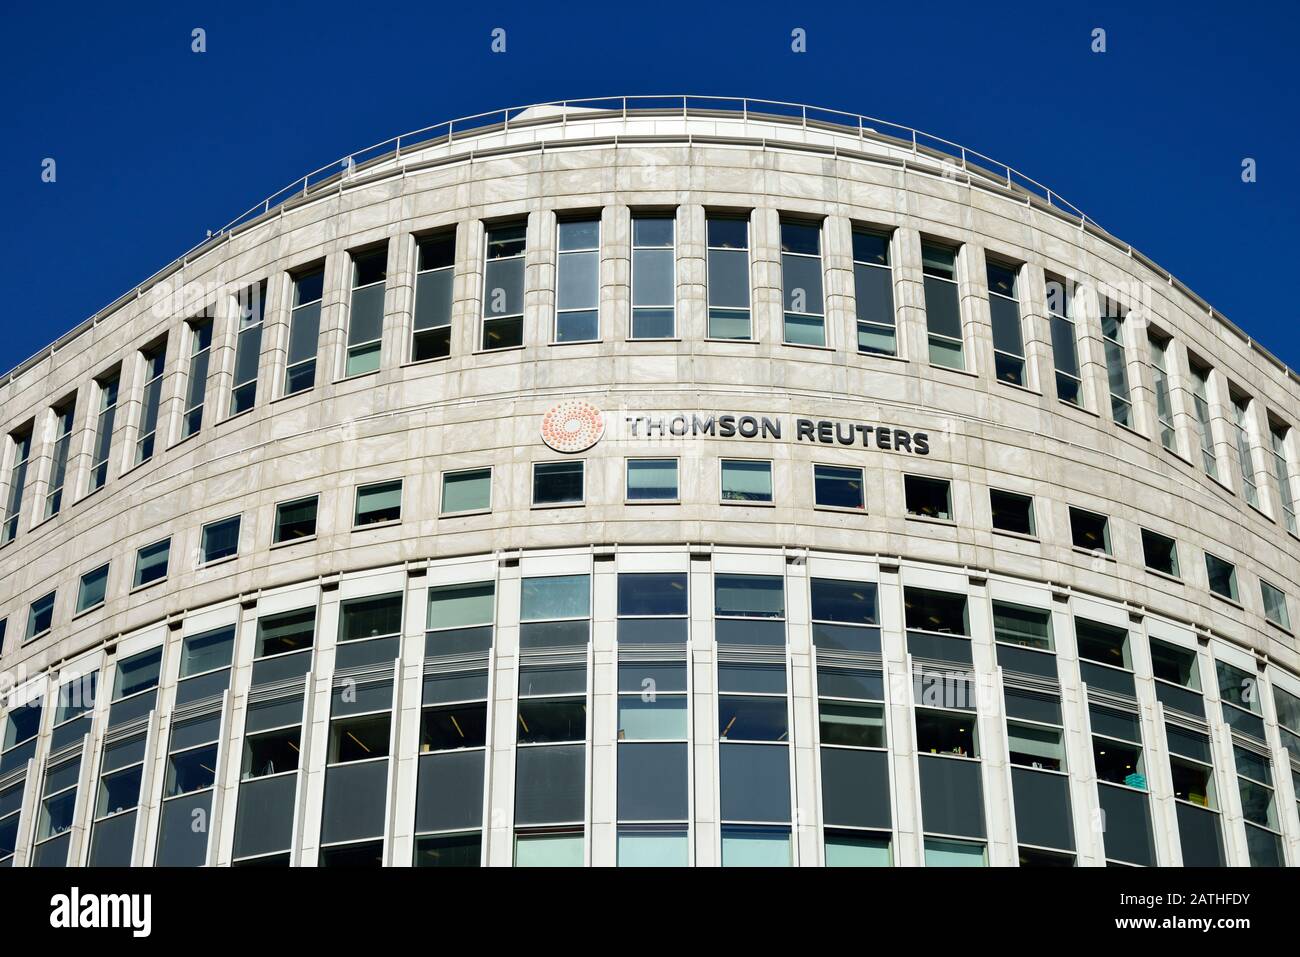 The Thomson Reuters Building, 30 South Colonnade, Canary Wharf, East London, United Kingdom Stock Photo